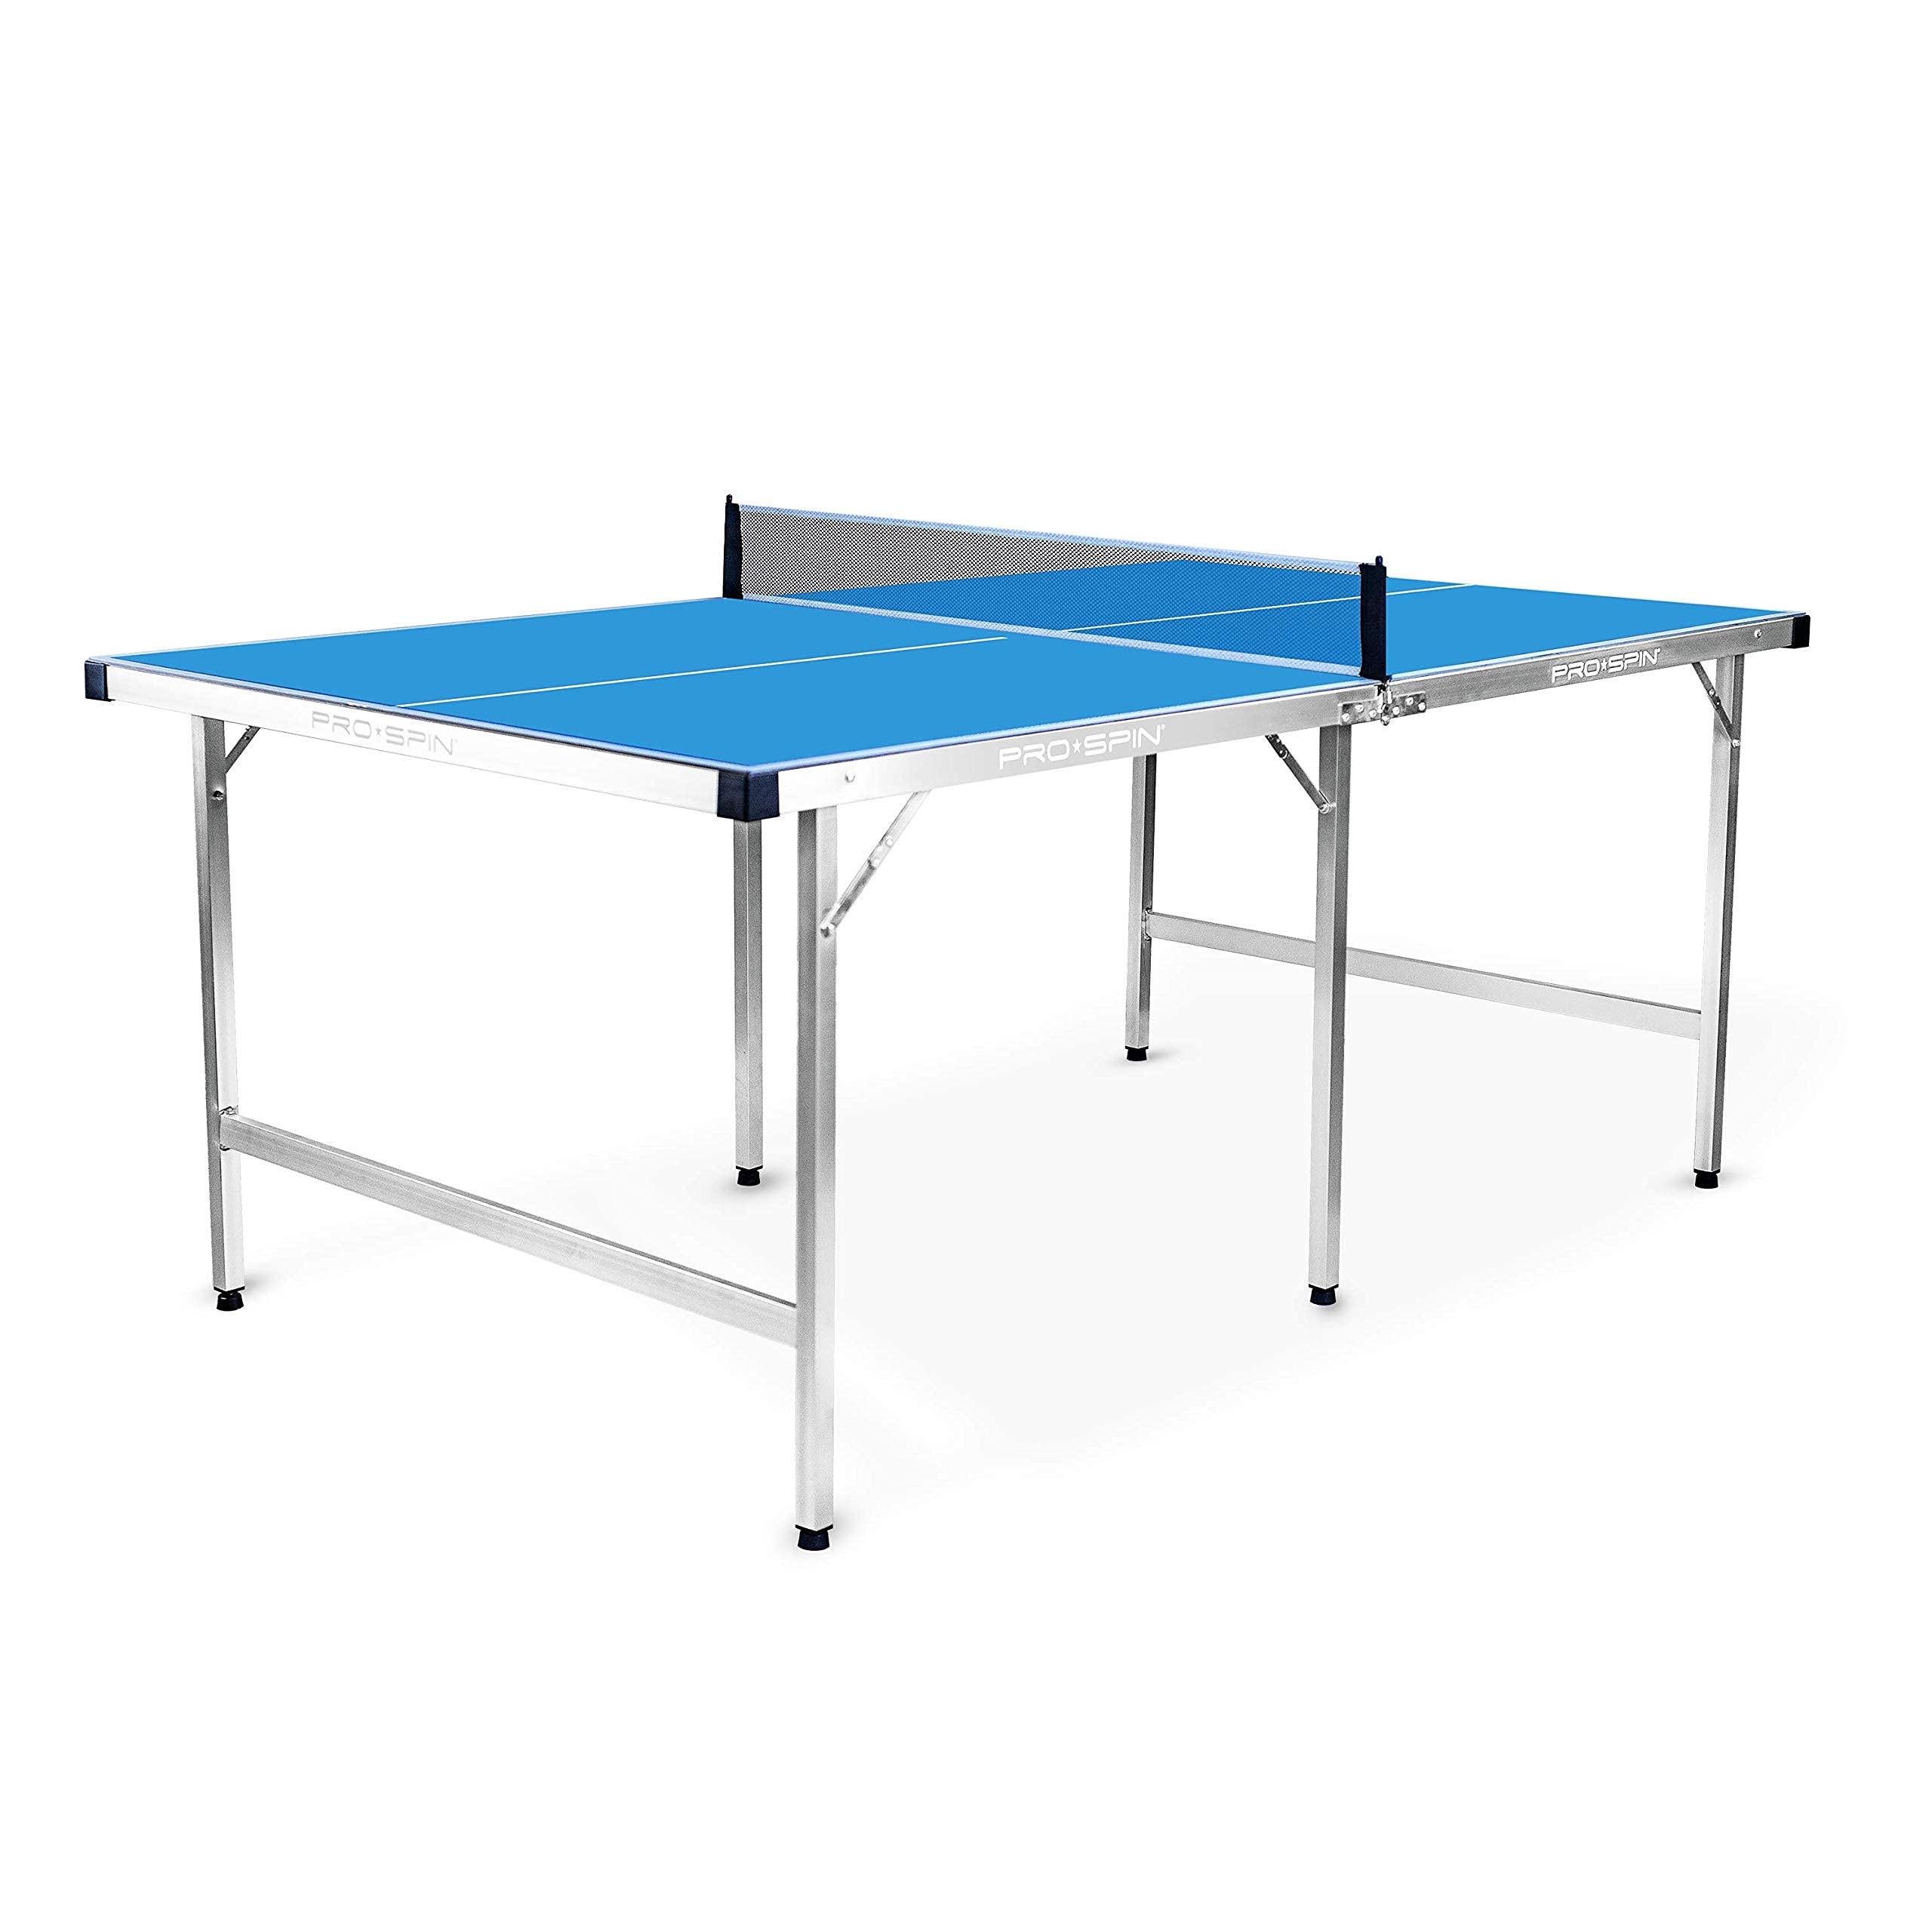 PRO SPIN PRO-SPIN Midsize Ping Pong Table Set | Outdoor/Indoor, Weatherproof | High-Performance Ping Pong Paddles & Balls | 100% Pre-Asse